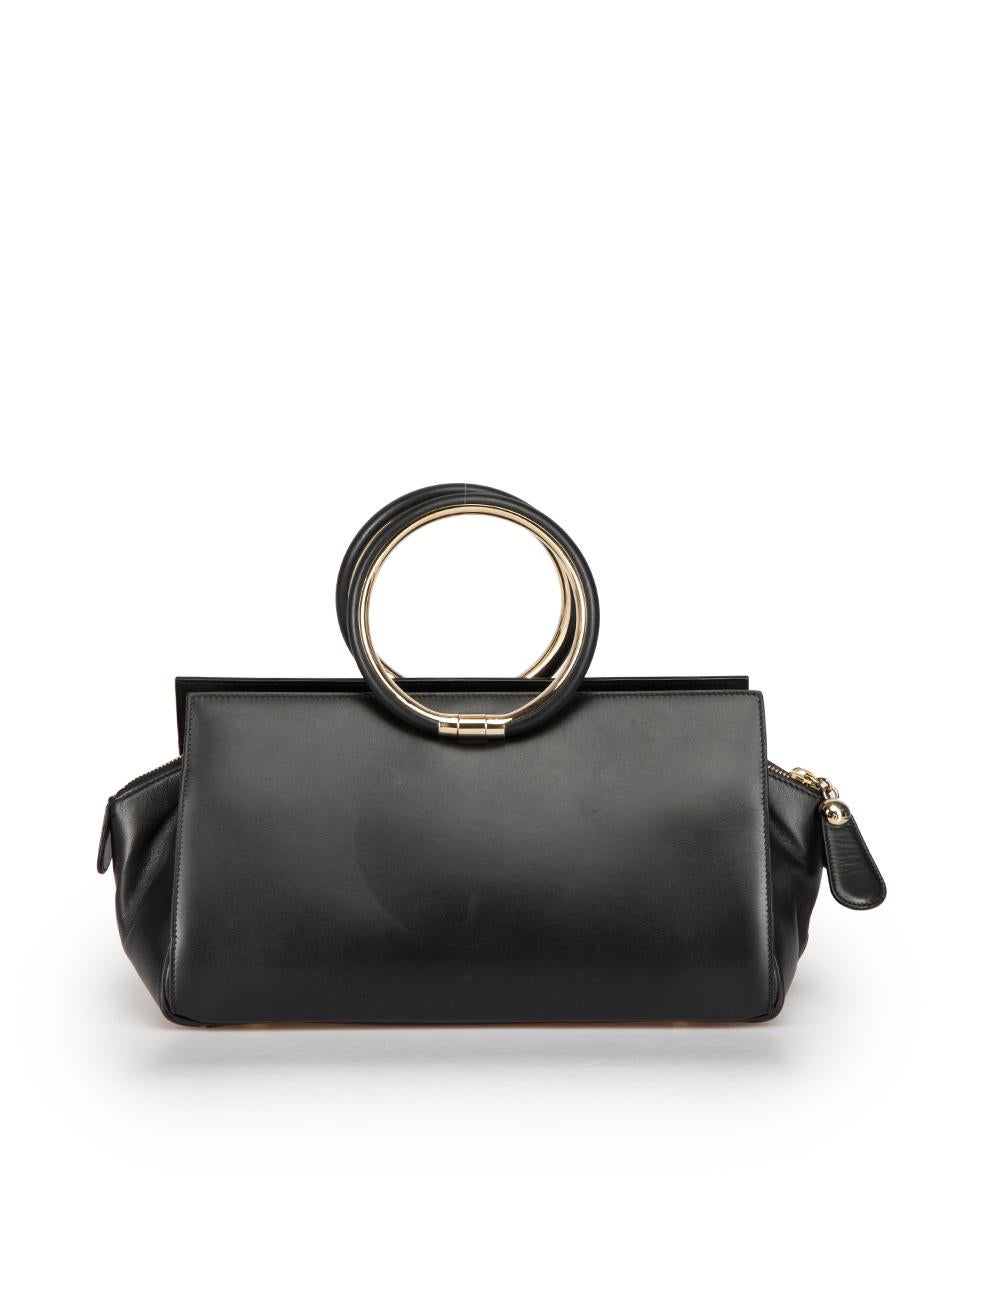 Dior Black Leather Circular Top-Handle Satchel In Excellent Condition For Sale In London, GB